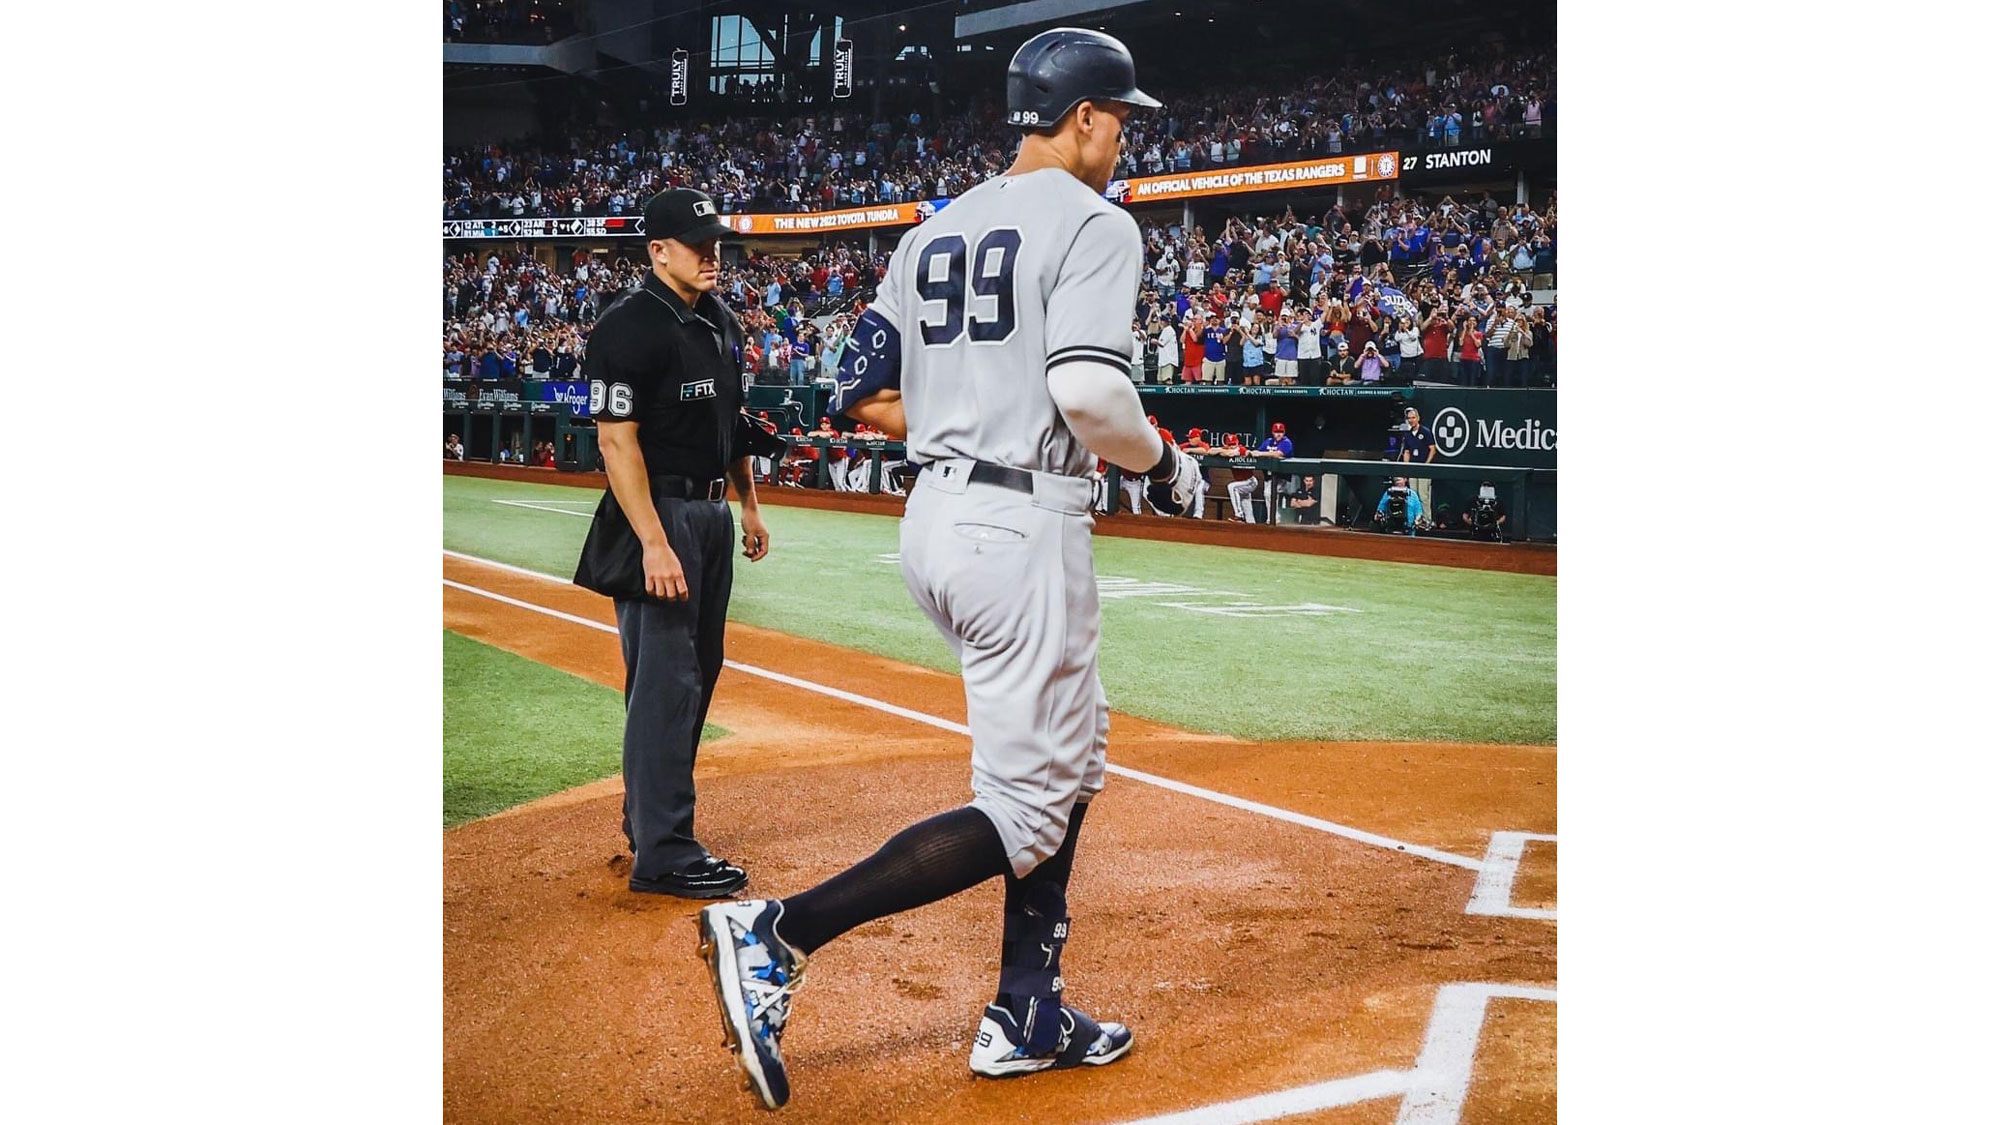 Chris waiting at home plate after Aaron Judge's record breaking 62nd homerun.